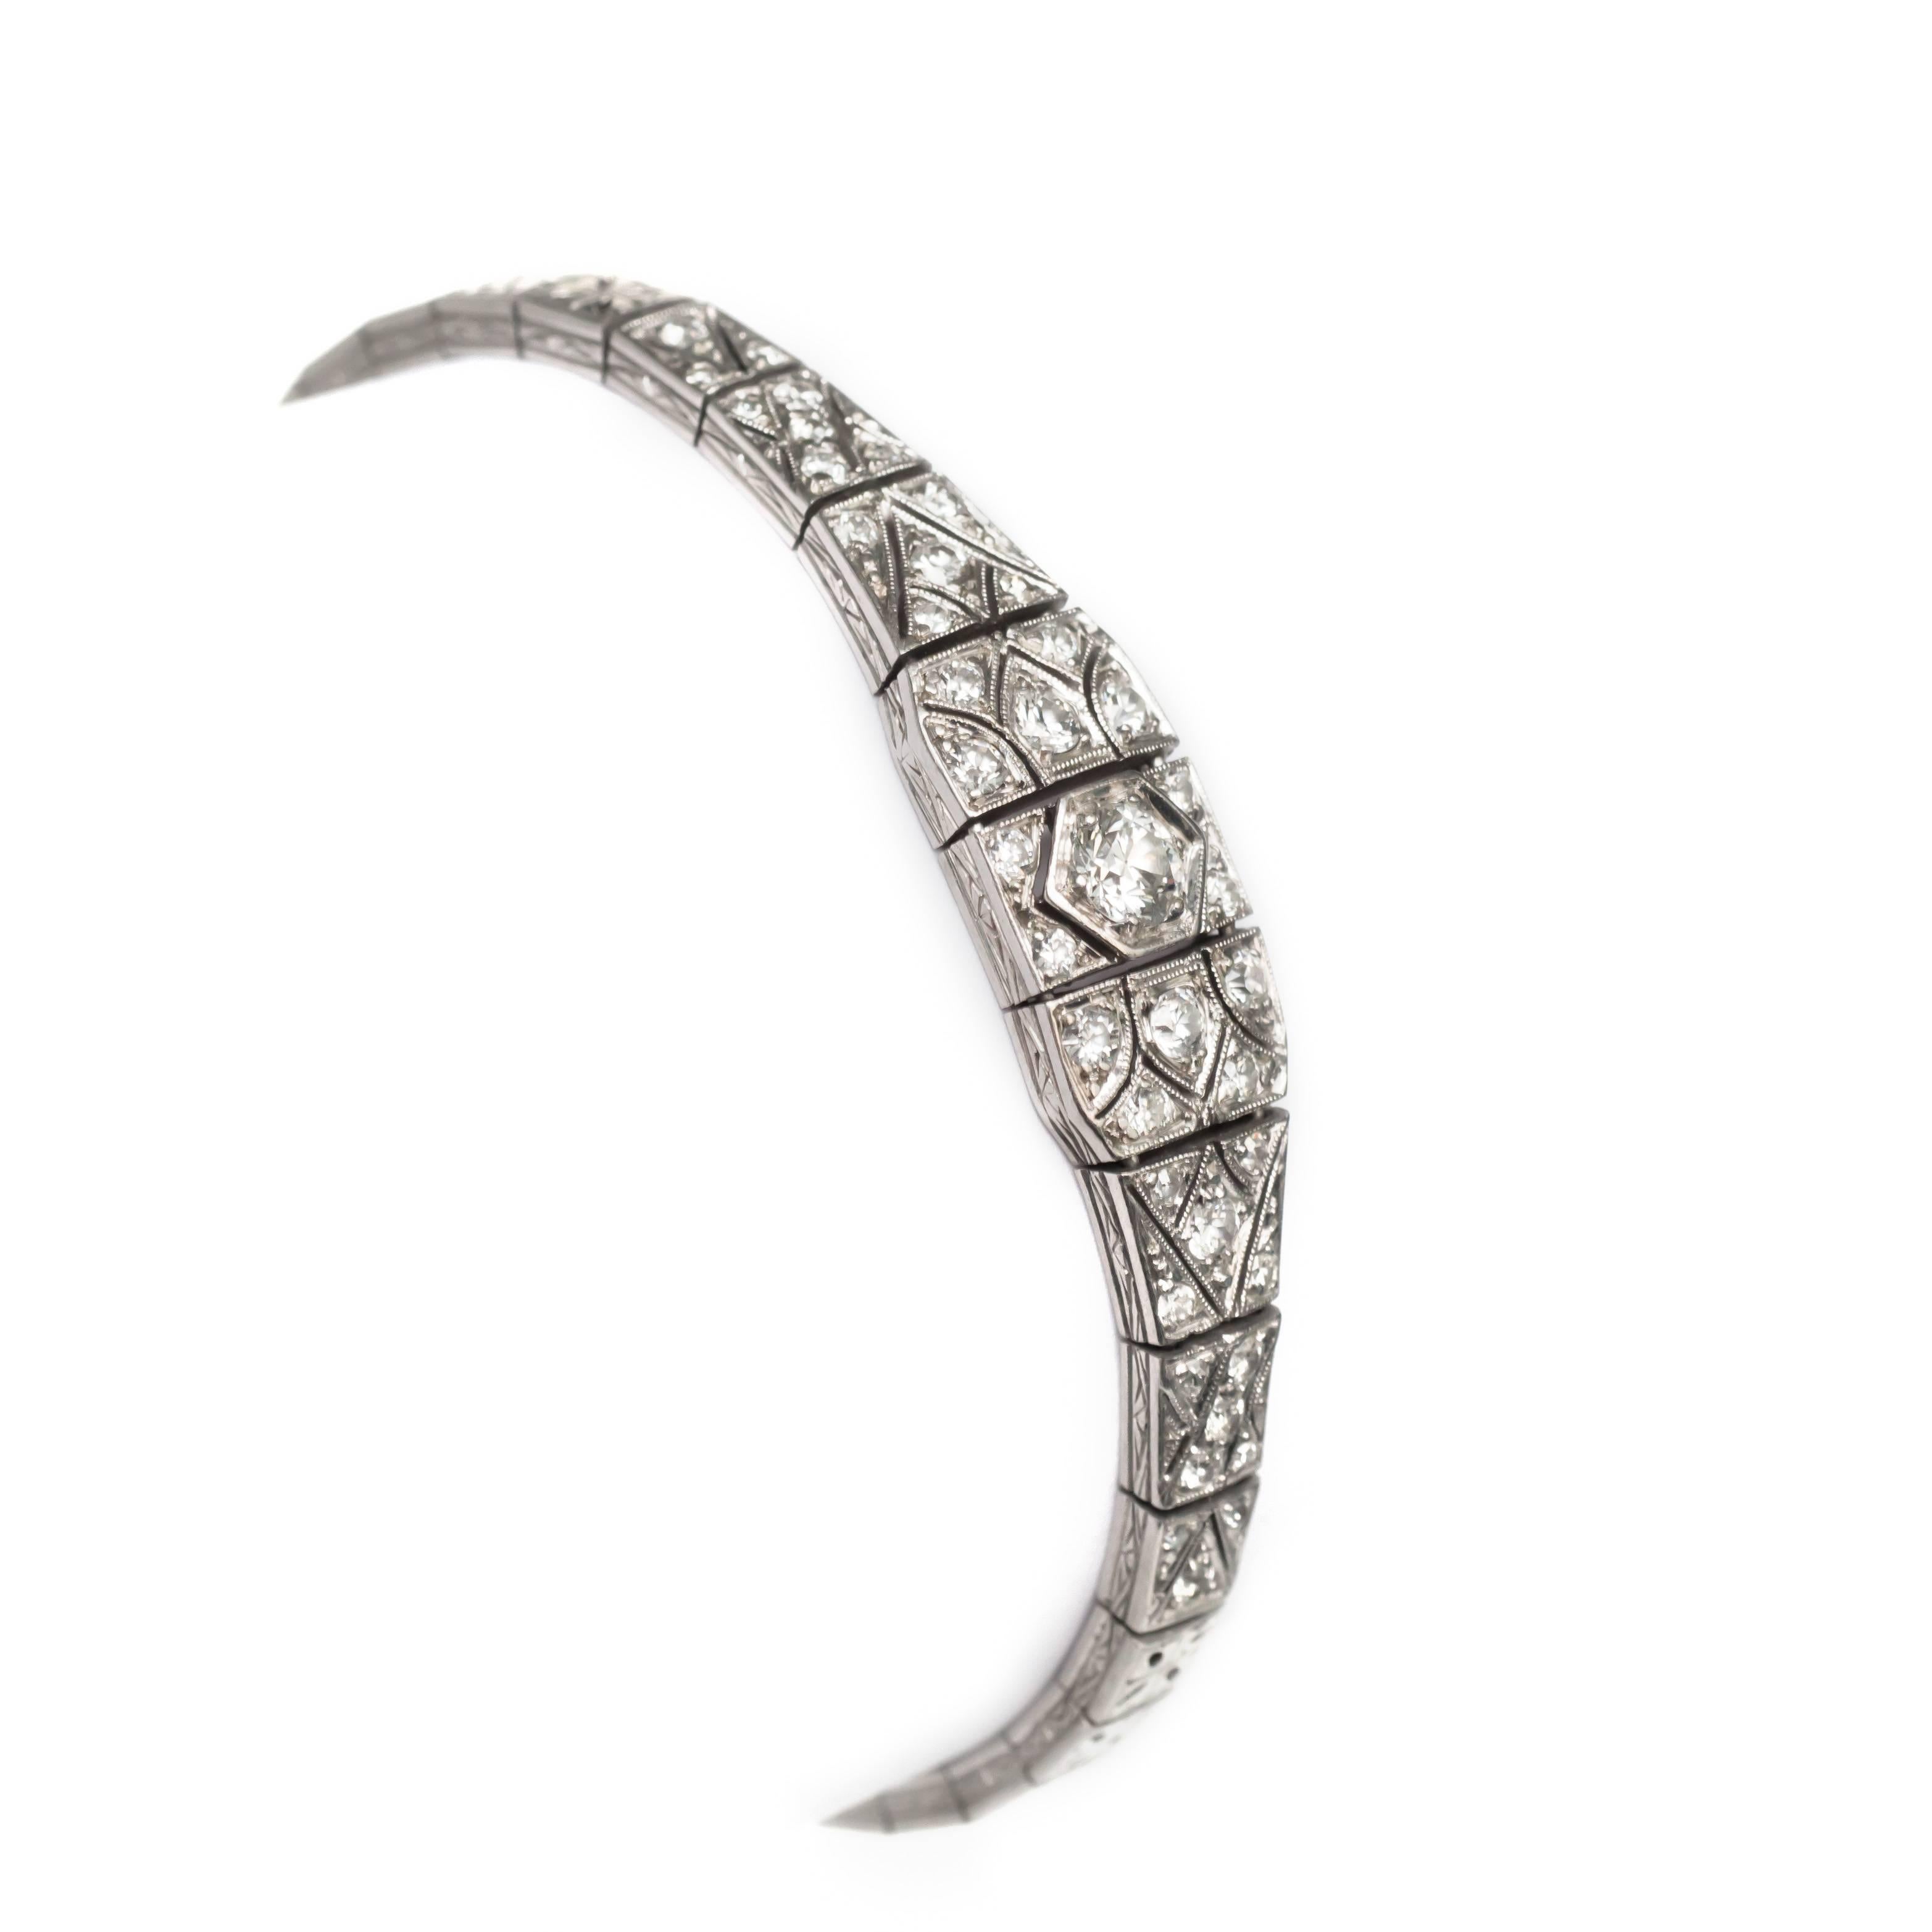 Item Details: 
Length: Approximately 6.5 inches / 29.2cm
Metal Type: Platinum
Weight: 19.9 grams

Diamond Details:
Shape: Old European Cut
Carat Weight: 1.00 Carat, Total Weight
Color: F
Clarity: VS
